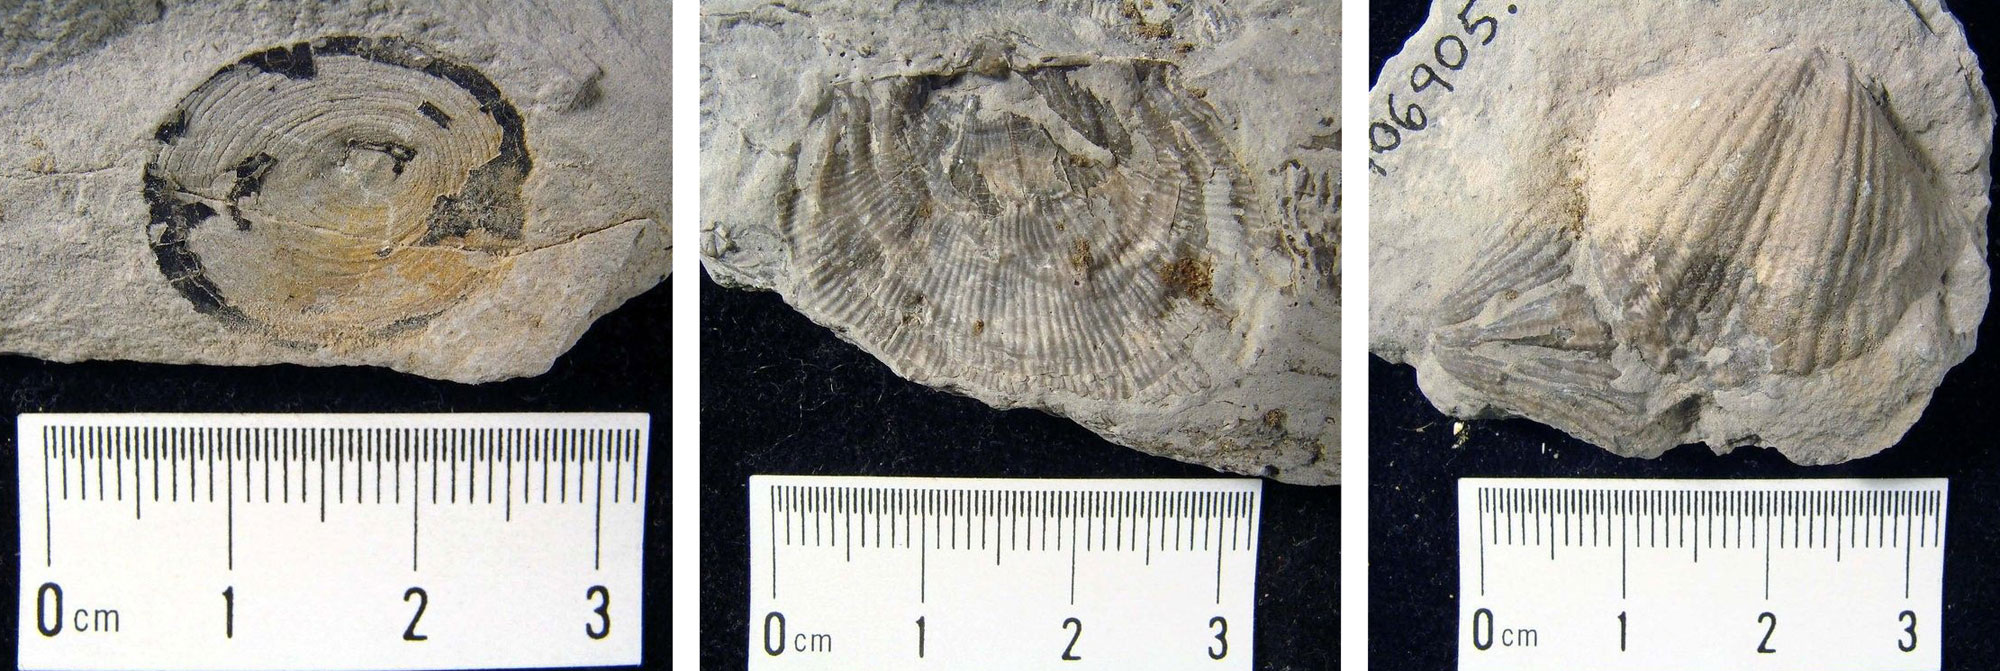 3-panel figure showing photographs of fossil brachiopods from the Pennsylvanian of Nevada. Panel 1: Orbiculoidea, a lingulate brachiopod with an oval shell with low concentric ridges or rings. Panel 2: Linoproductus, a D-shaped brachiopod shell with radiating ridges. Panel 3: A spirifer branchiopod shell with radiating ridges and a central fold.